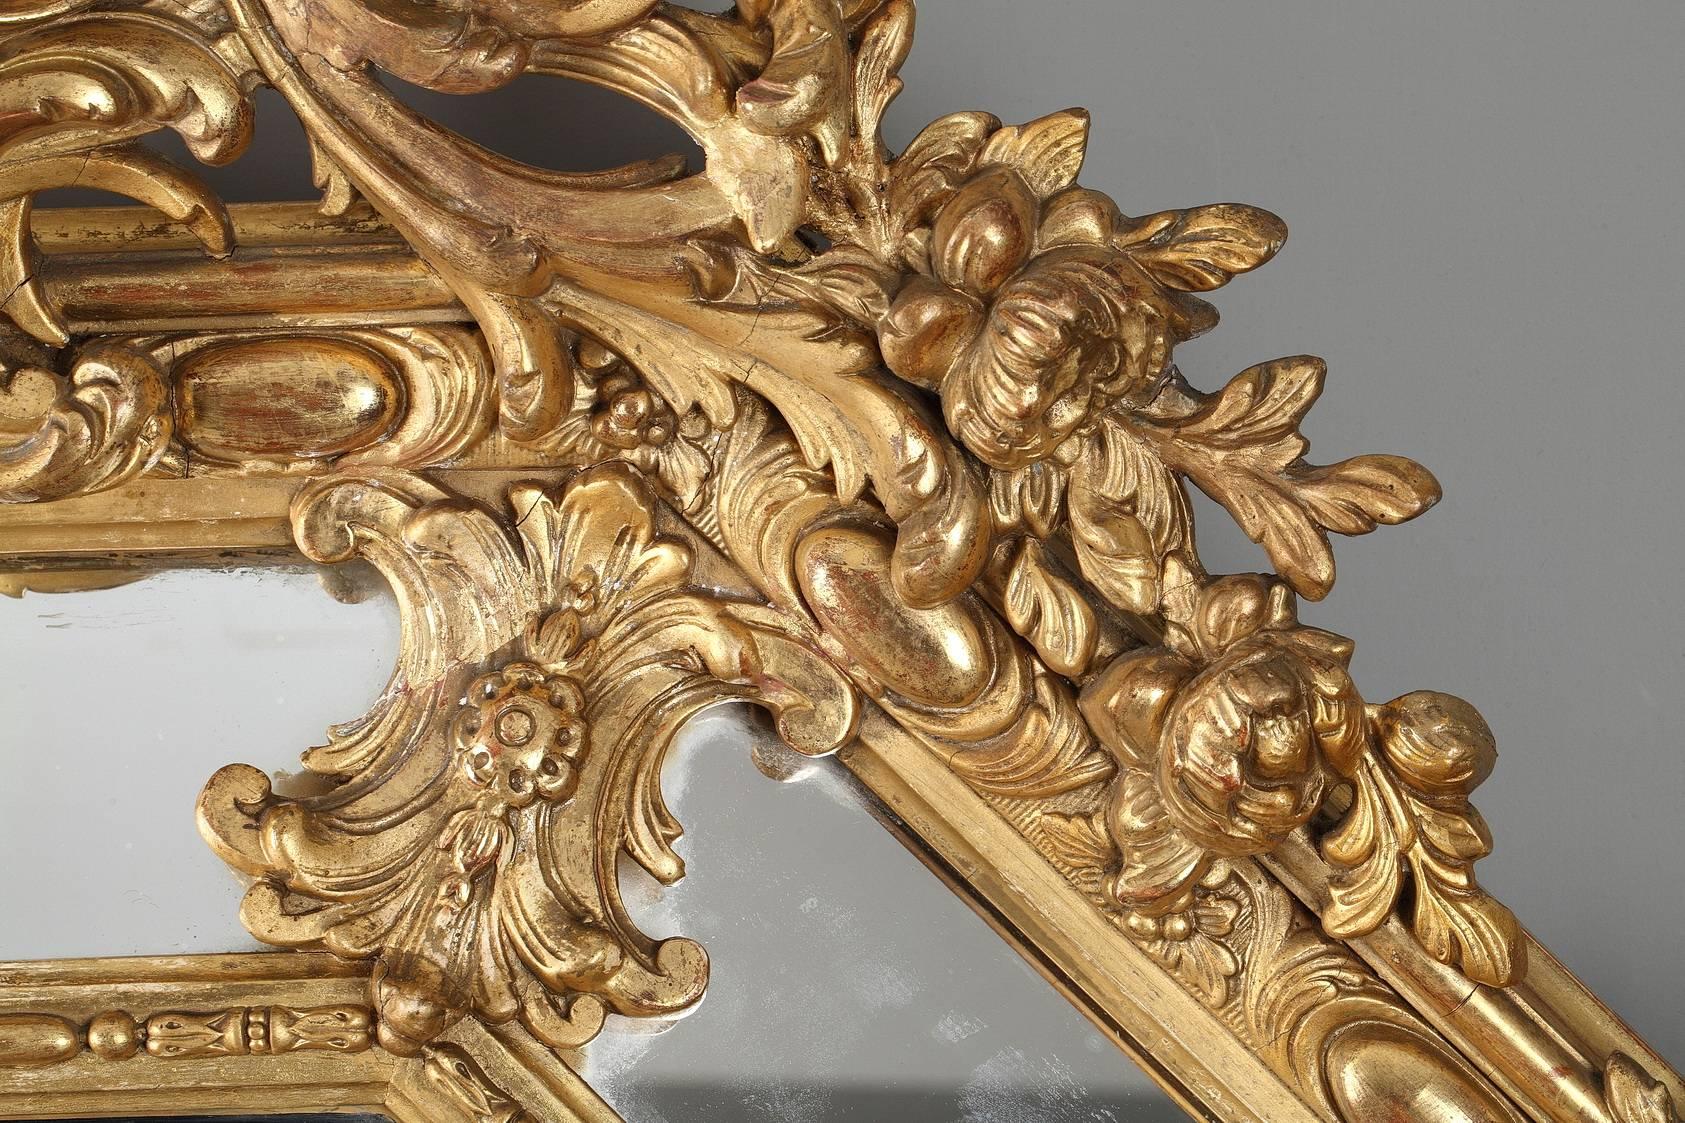 Very large octagonal mirror in giltwood and stucco. It is richly decorated with acanthus leaves, ova, floral motif and foliated scrolls. Bevel central mirror. Napoleon III period,

circa 1870.
Dimensions: W 39.4 in, D 2.8in, H 61 in.
Dimensions: